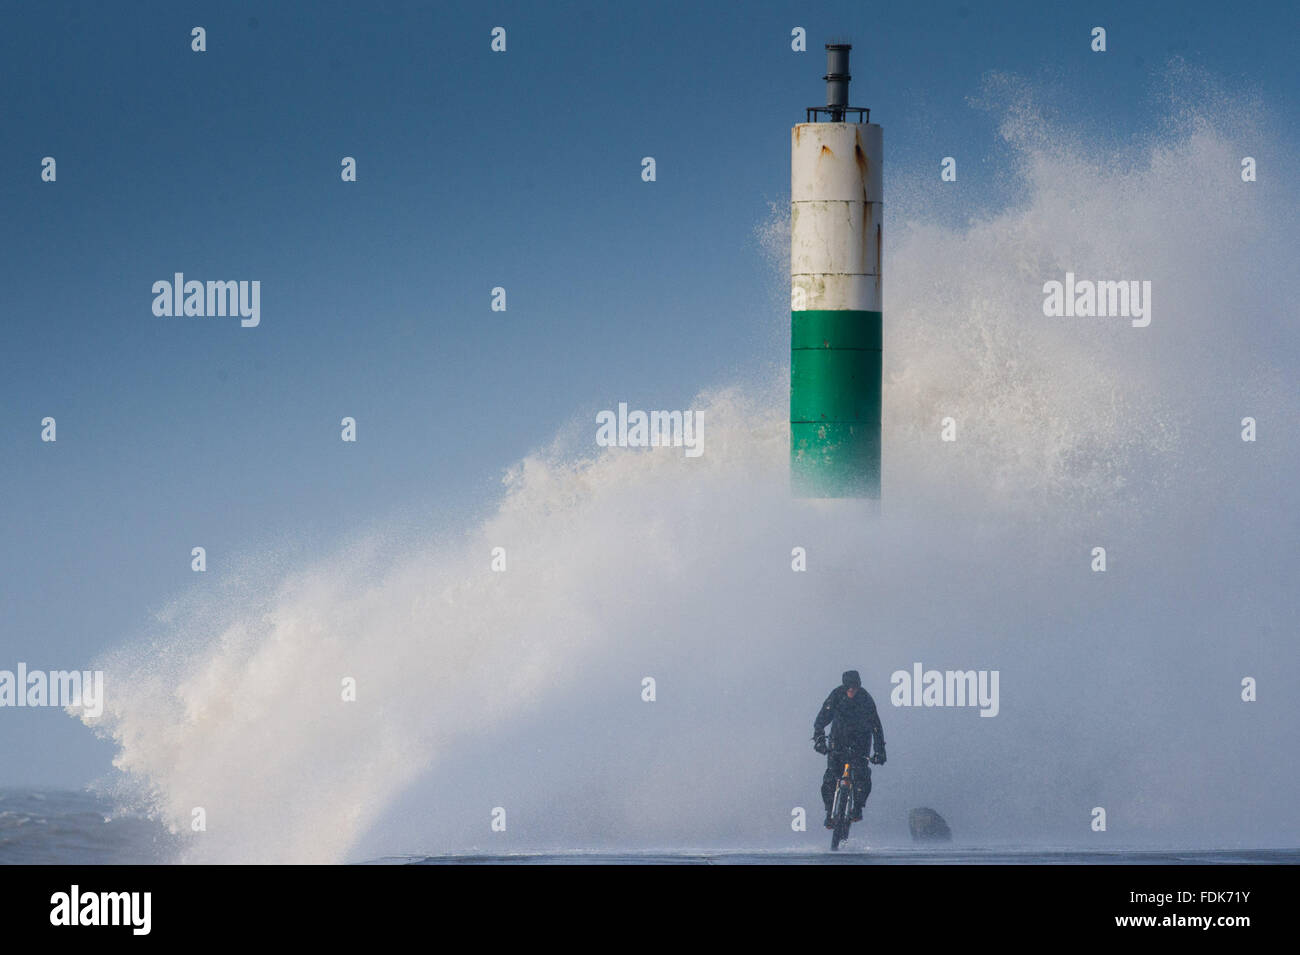 Aberystwyth, Ceredigion, Wales, UK. 1st February, 2016.   Storm Henry, the eighth named storm of the 2015/16 winter, batters the coast and sea defences at Aberystwyth.    A cyclist  takes a risk as he cycles close to the huge waves breaking over the sea wall and lighthouse at Aberystwut harbout.   Yellow and Amber severe weather warnings are in place for much of northern England and Scotland    photo Credit:  Keith Morris / Alamy Live News Stock Photo